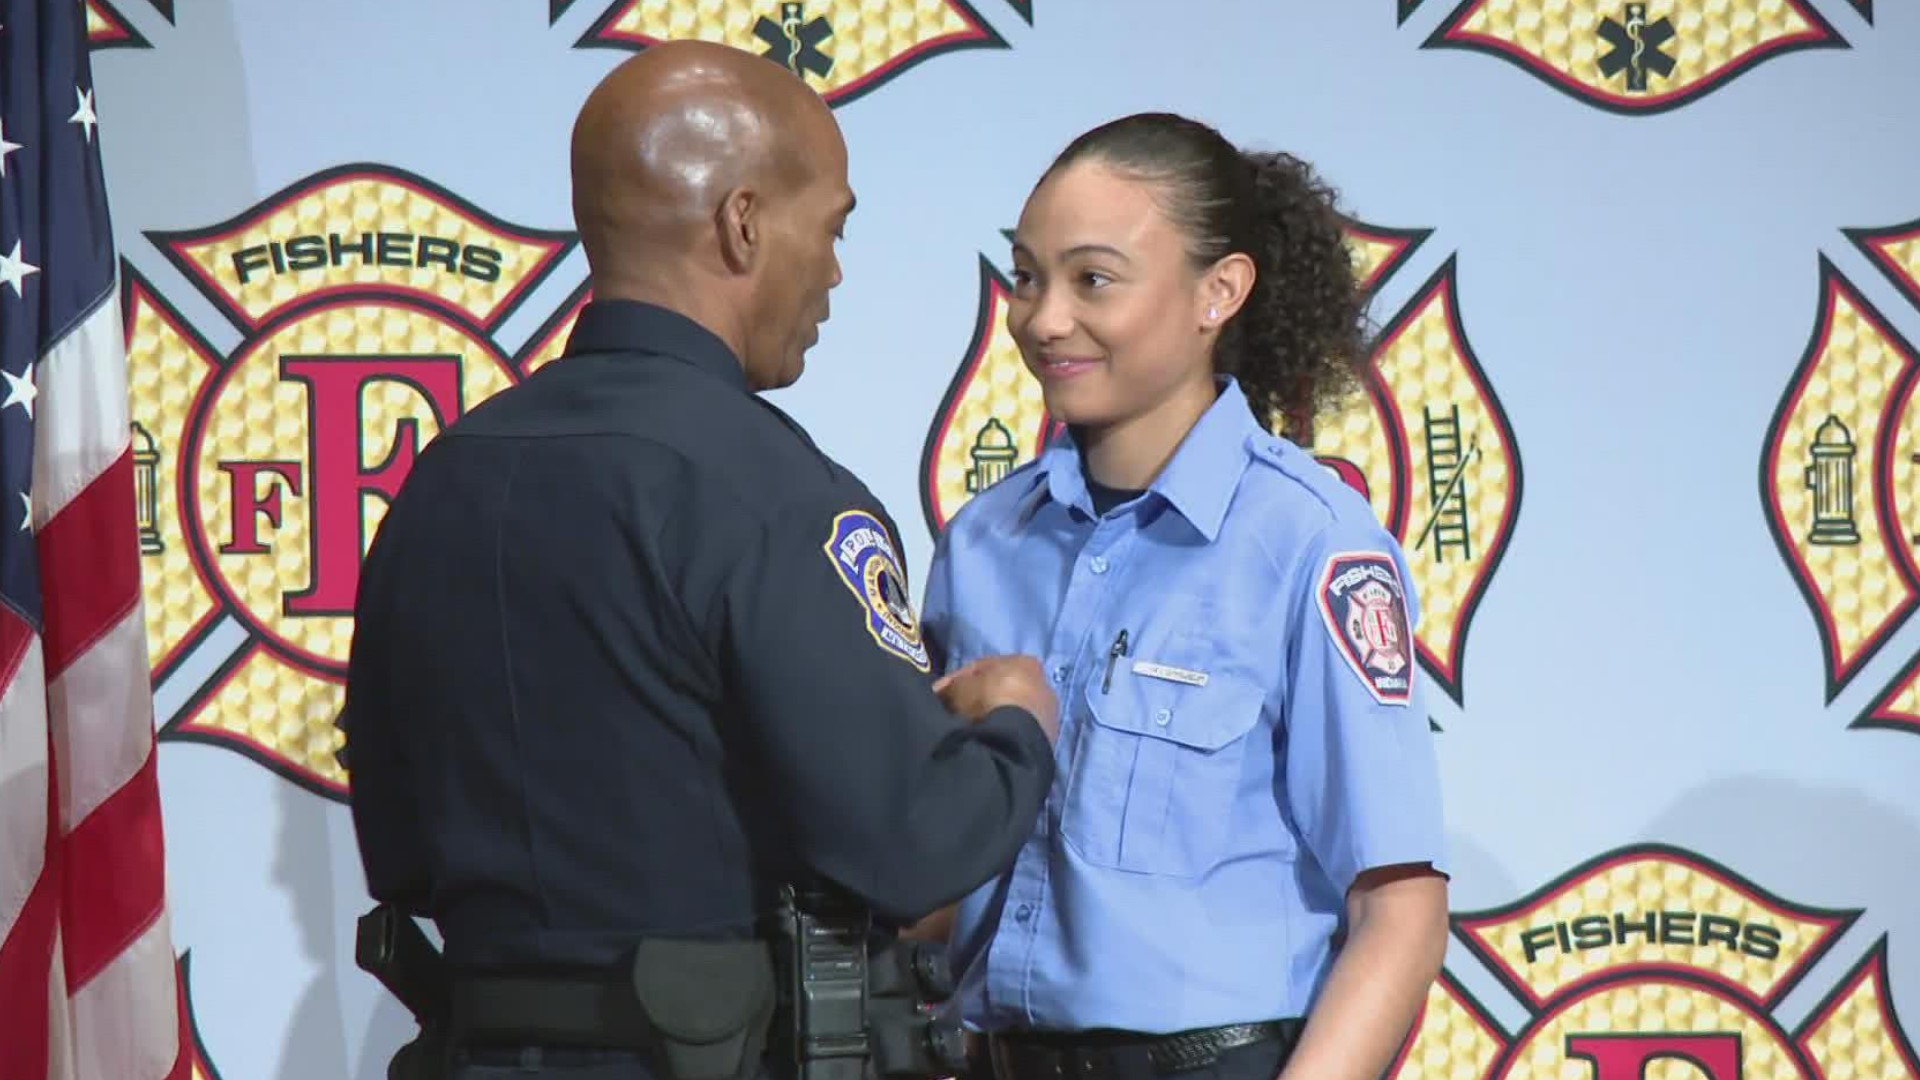 Lauren Gray is the first Black woman to join the Fishers Fire Department